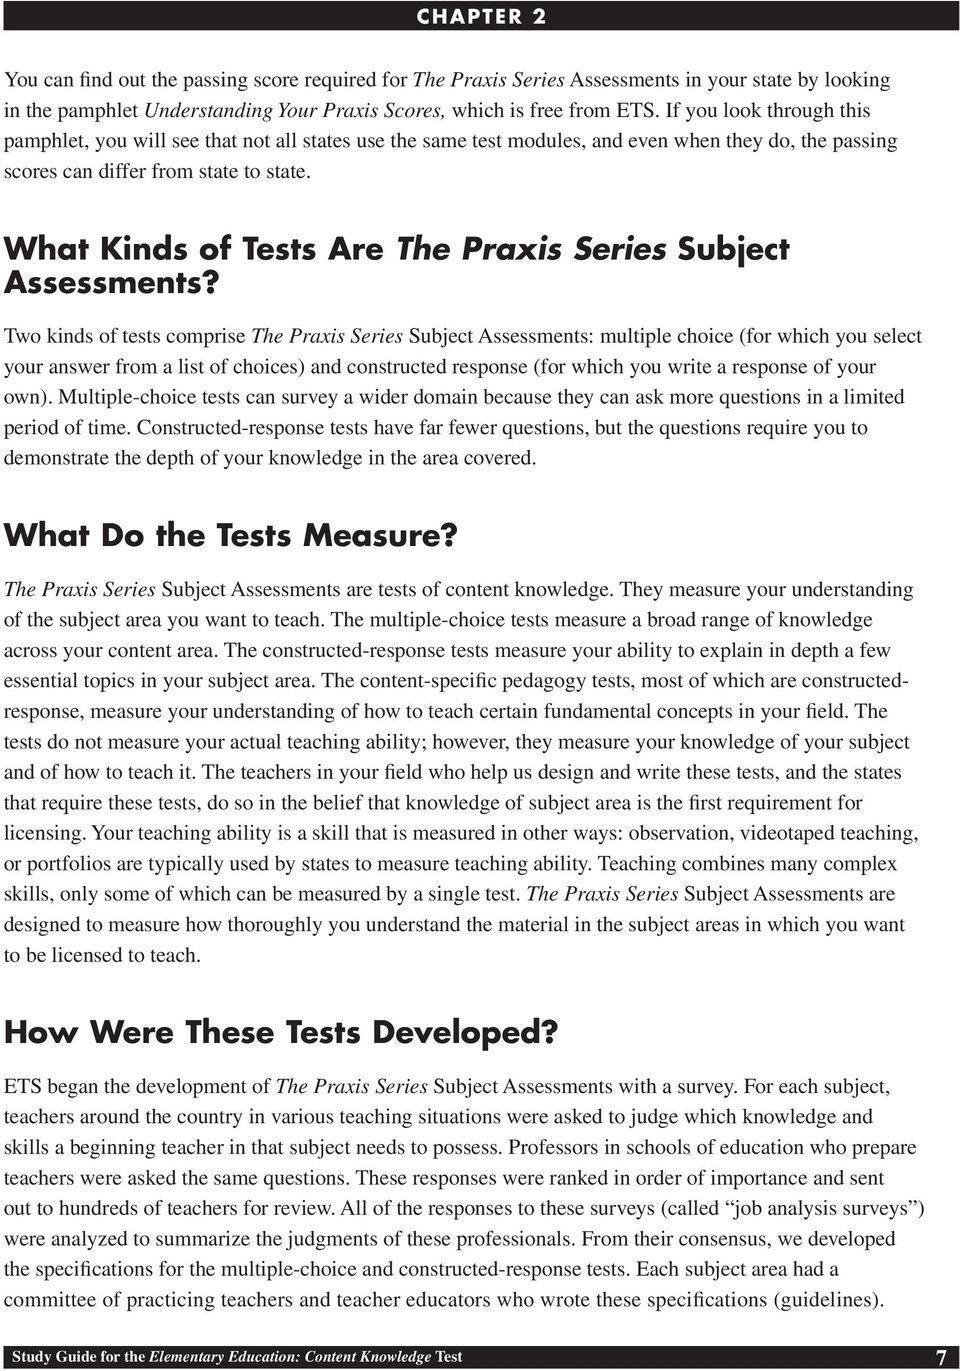 What Kinds of Tests Are The Praxis Series Subject Assessments?